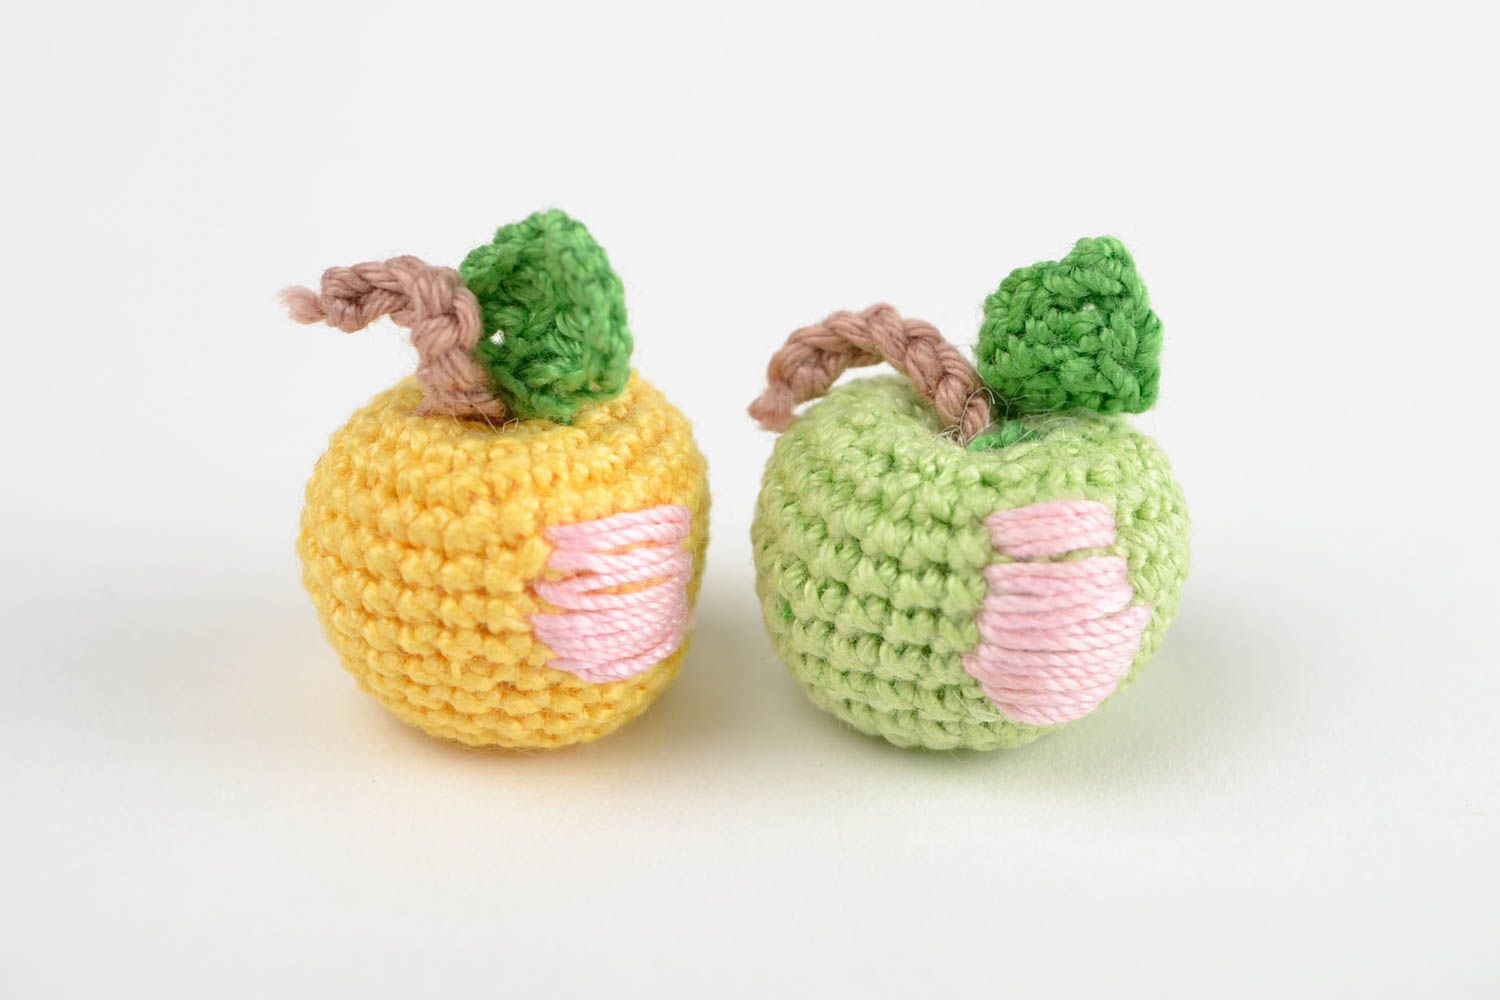 Handmade toy crocheted toy unusual toy for kids designer toy fruit toys photo 3